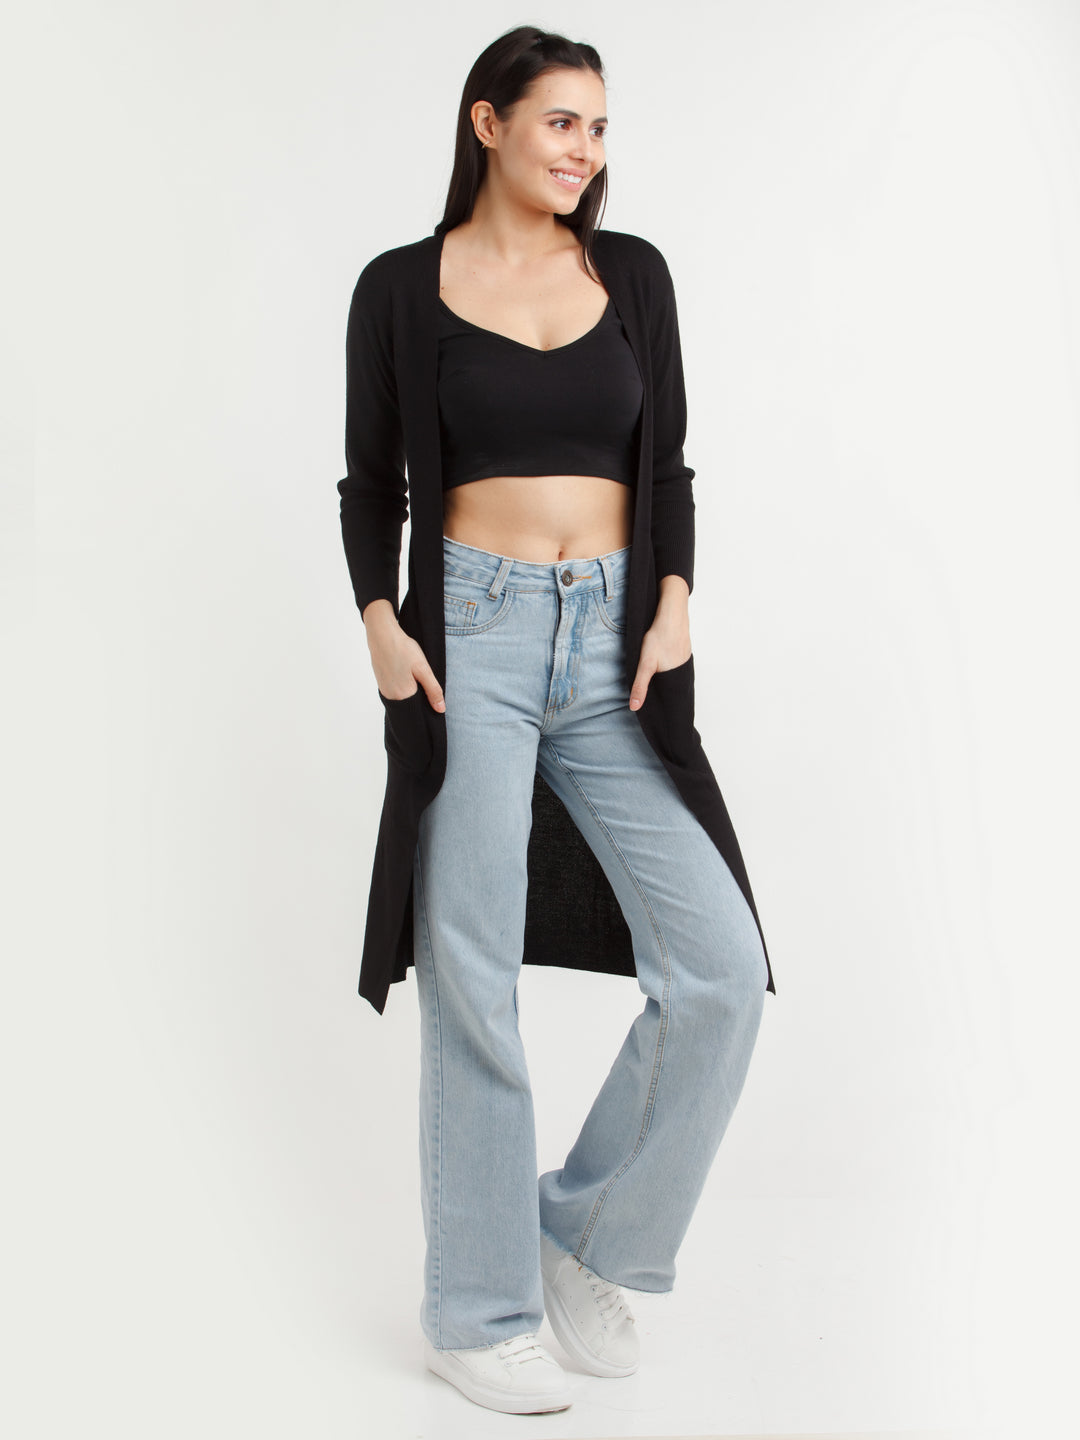 Black Solid Cardigan For Women